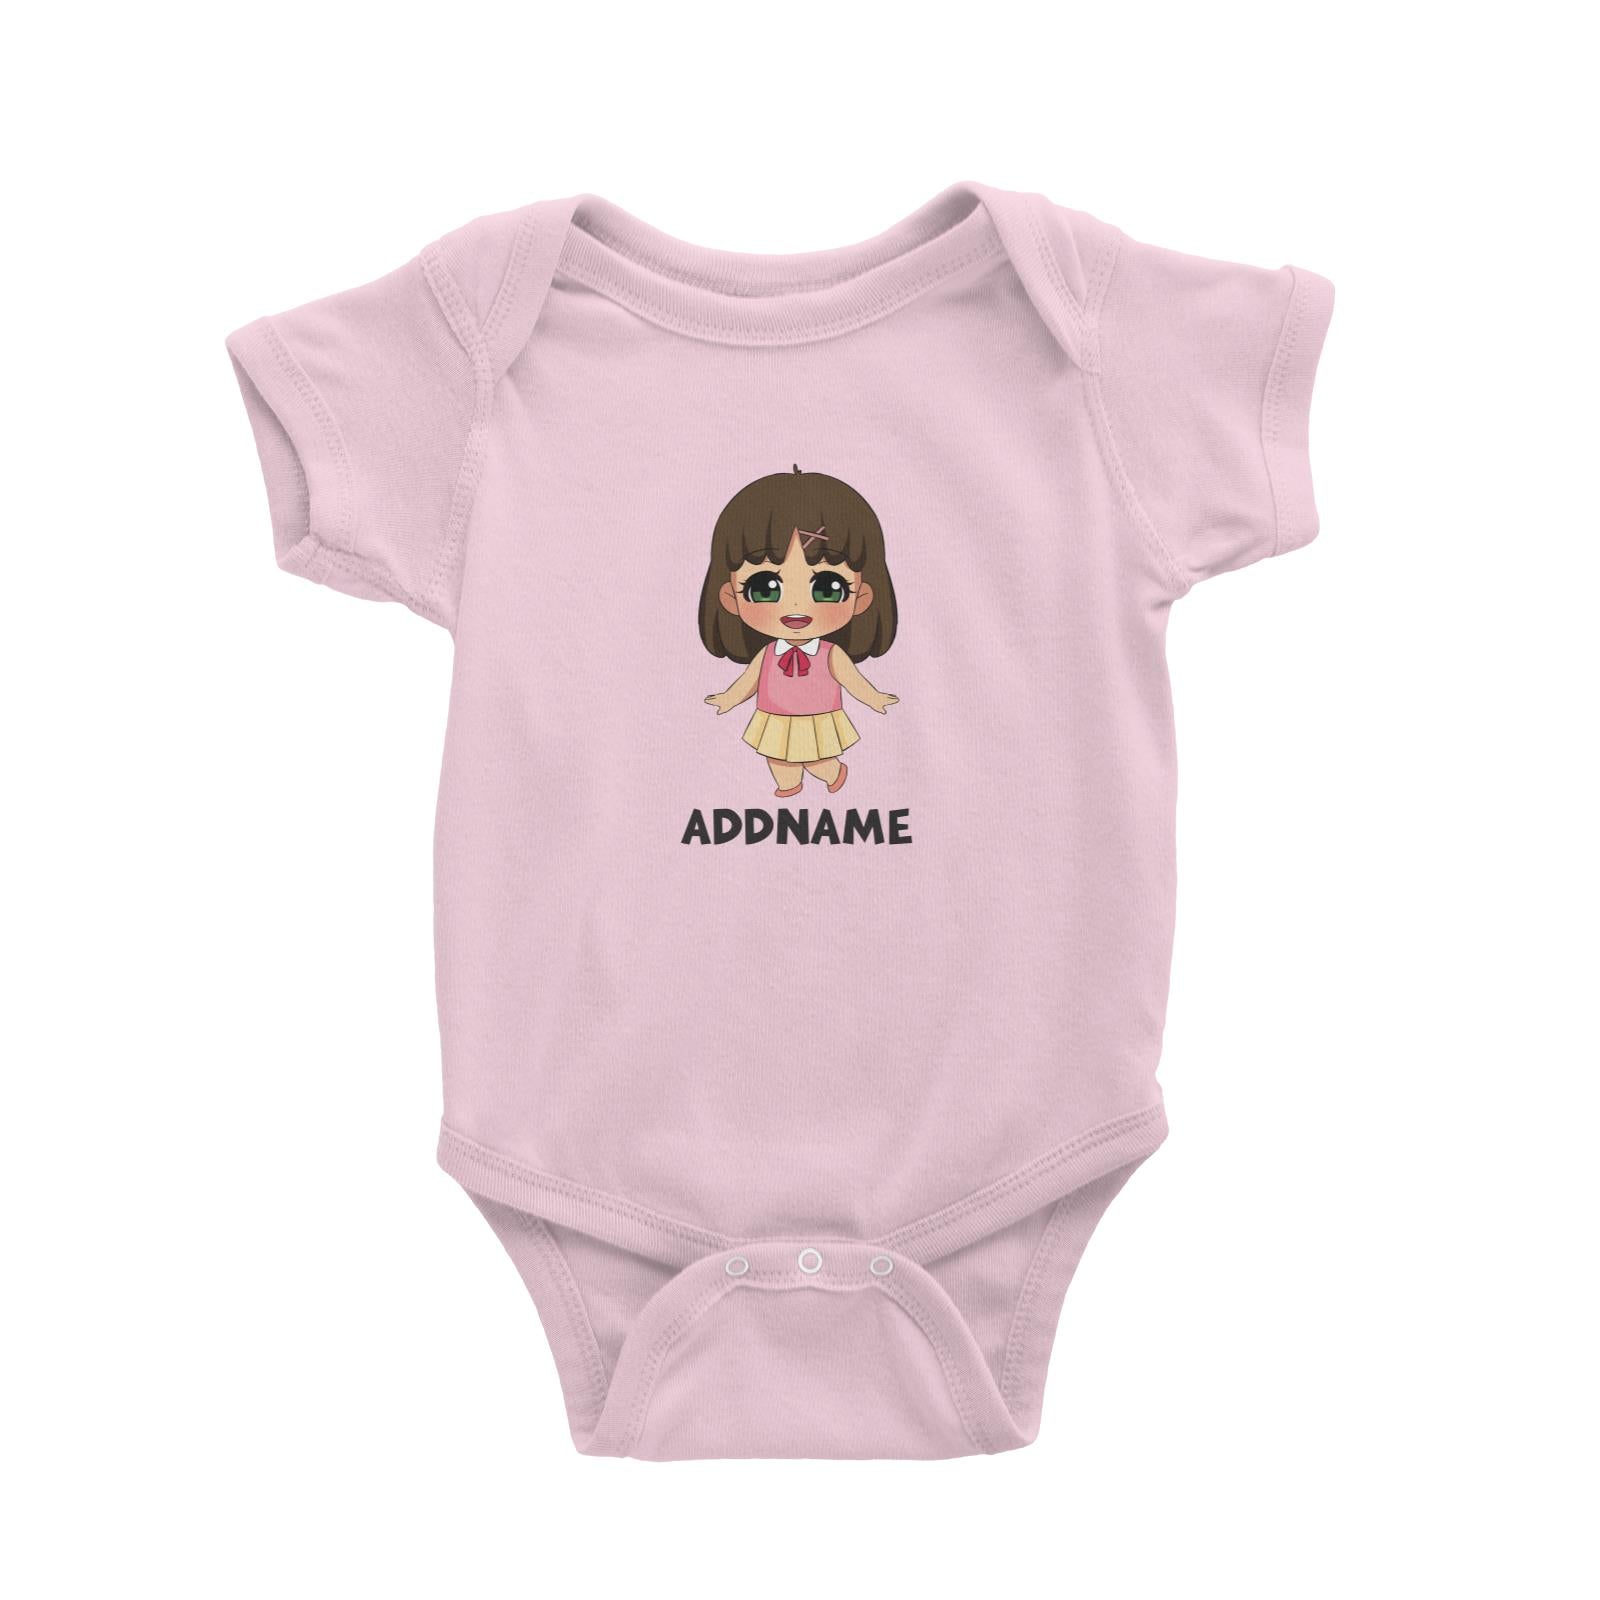 Children's Day Gift Series Little Chinese Girl Addname Baby Romper